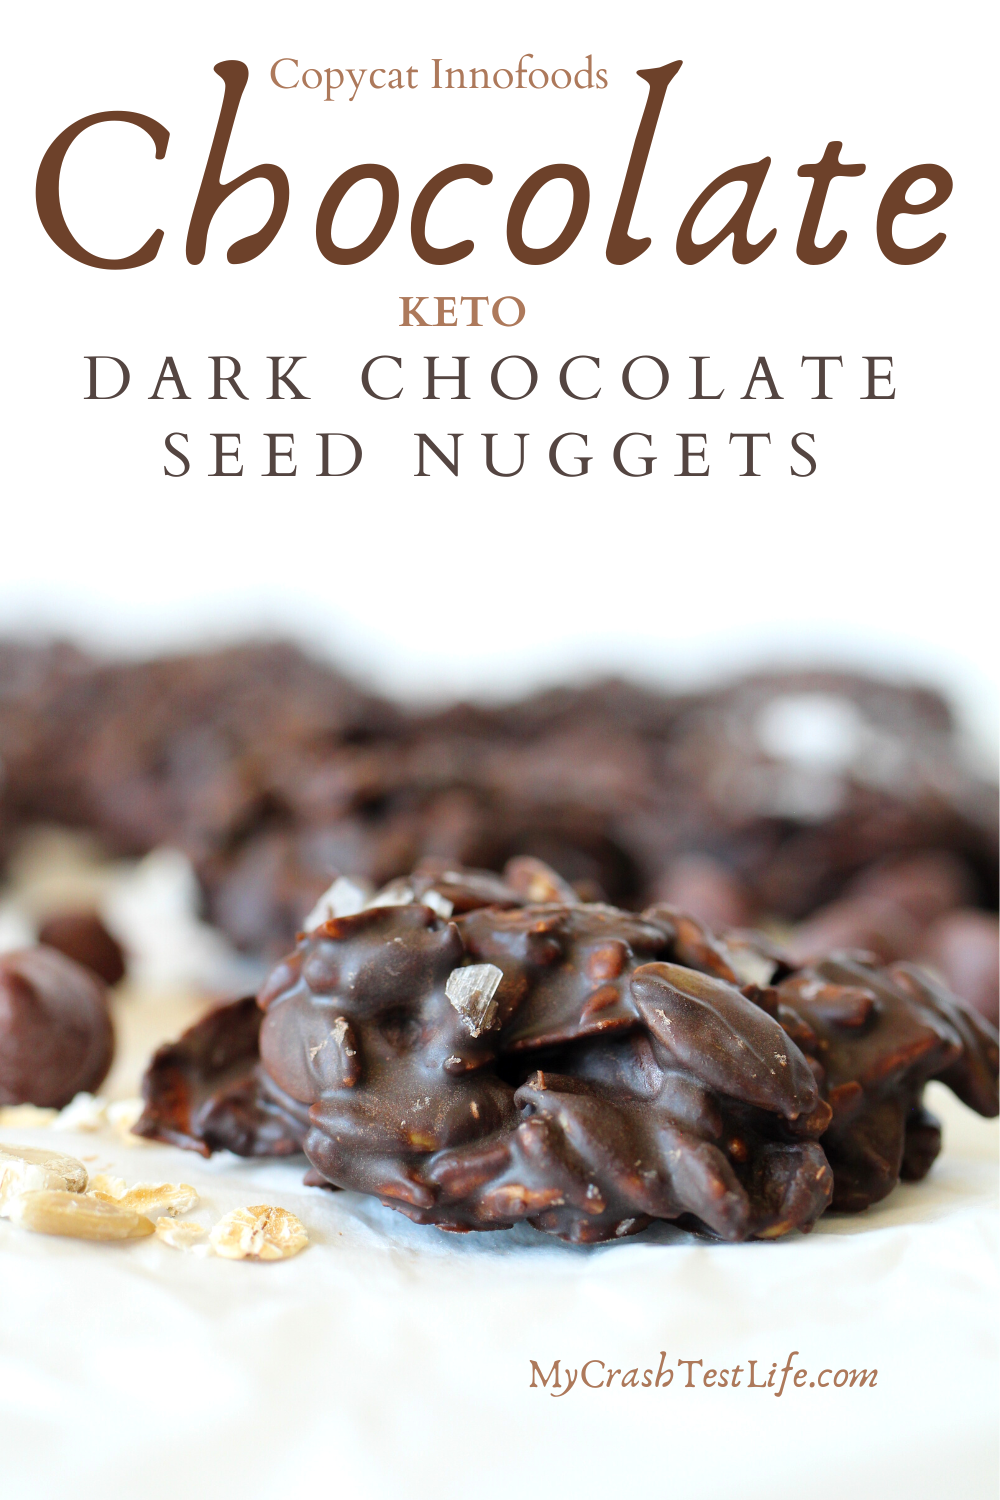 keto dark chocolate nuggets that are nut-free